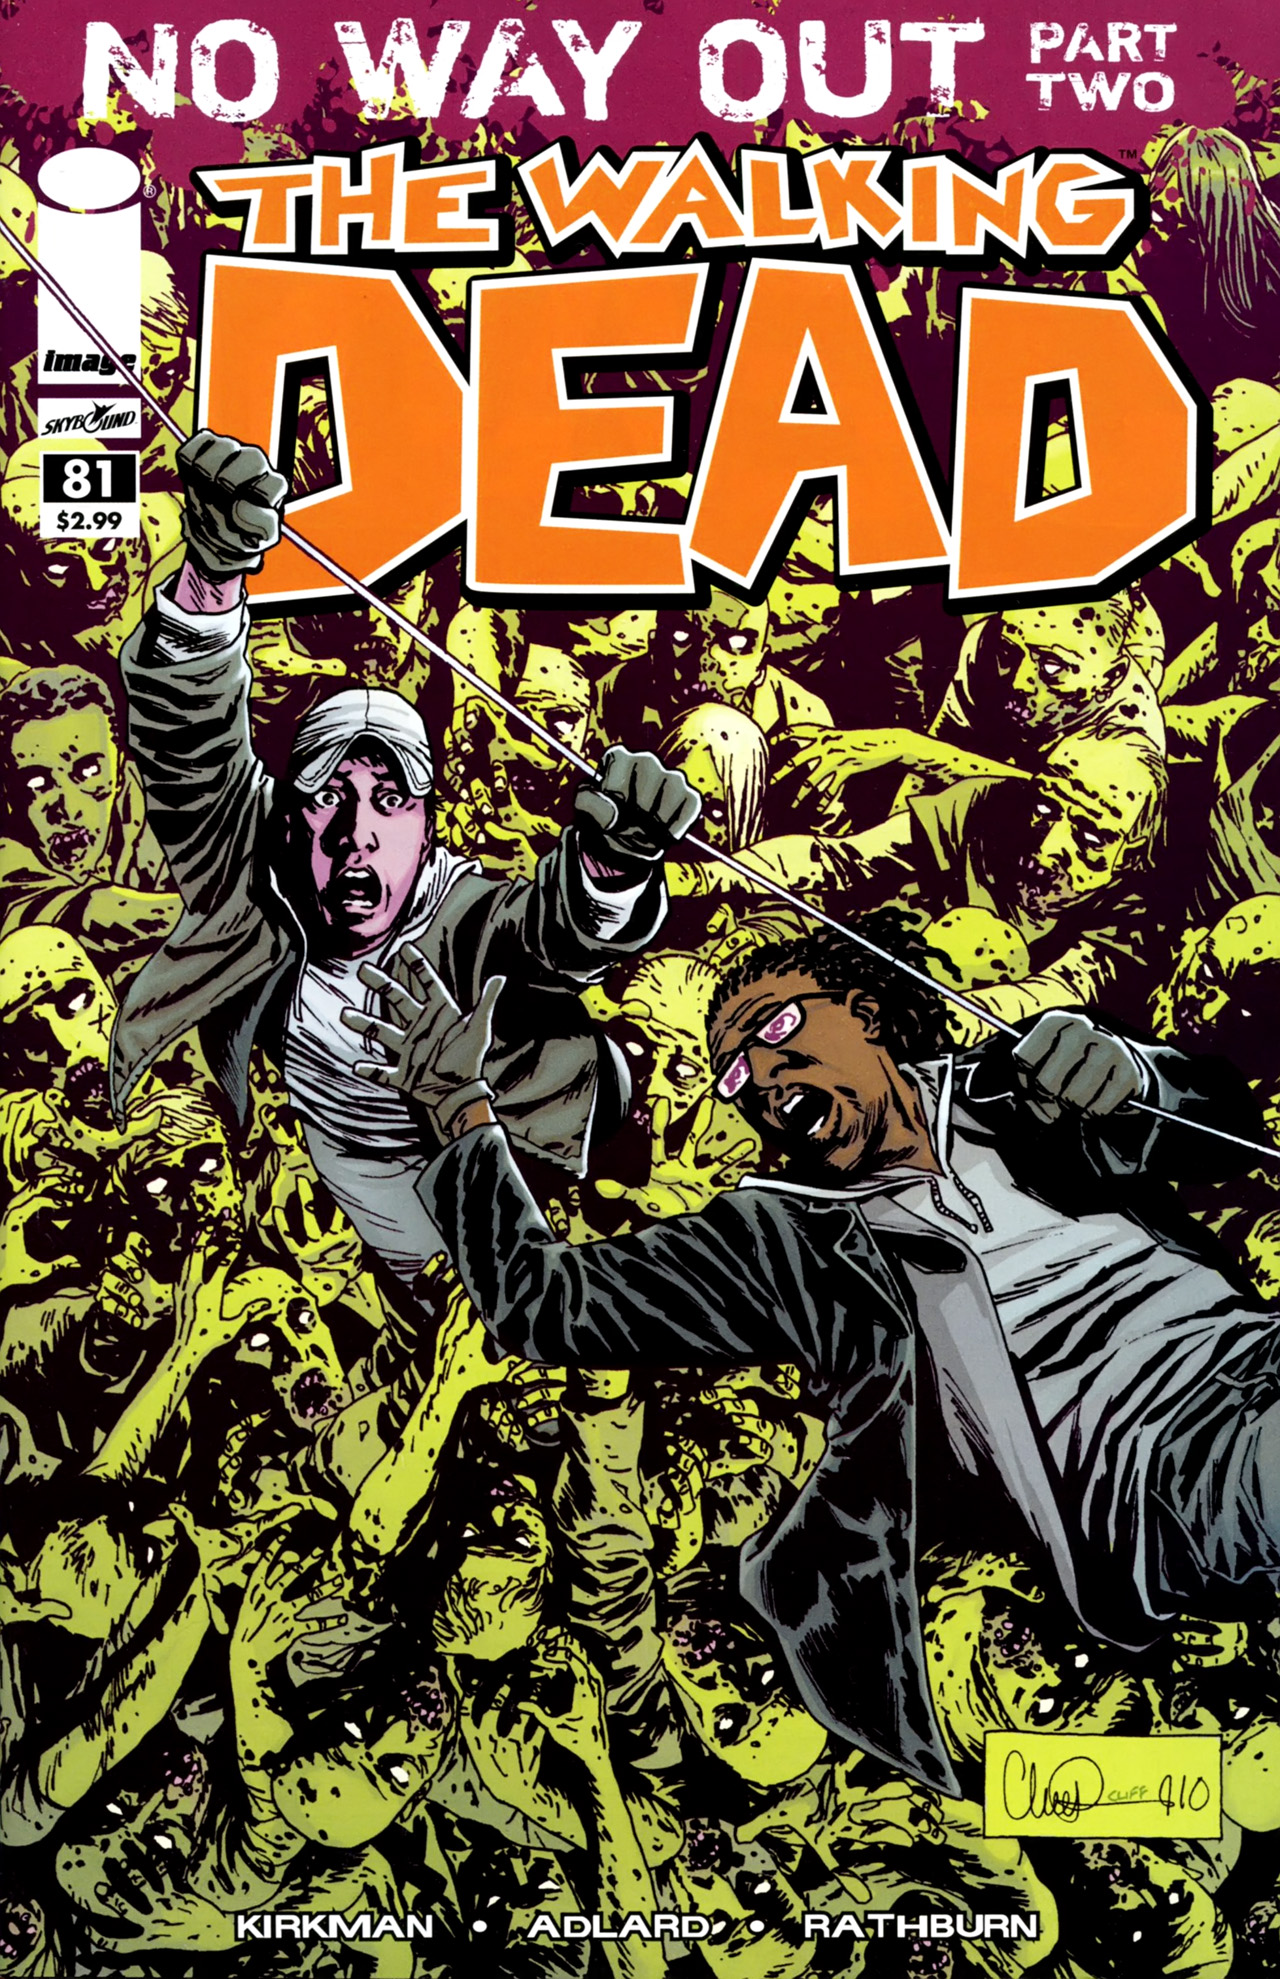 The Walking Dead #81 - No Way Out: Part Two